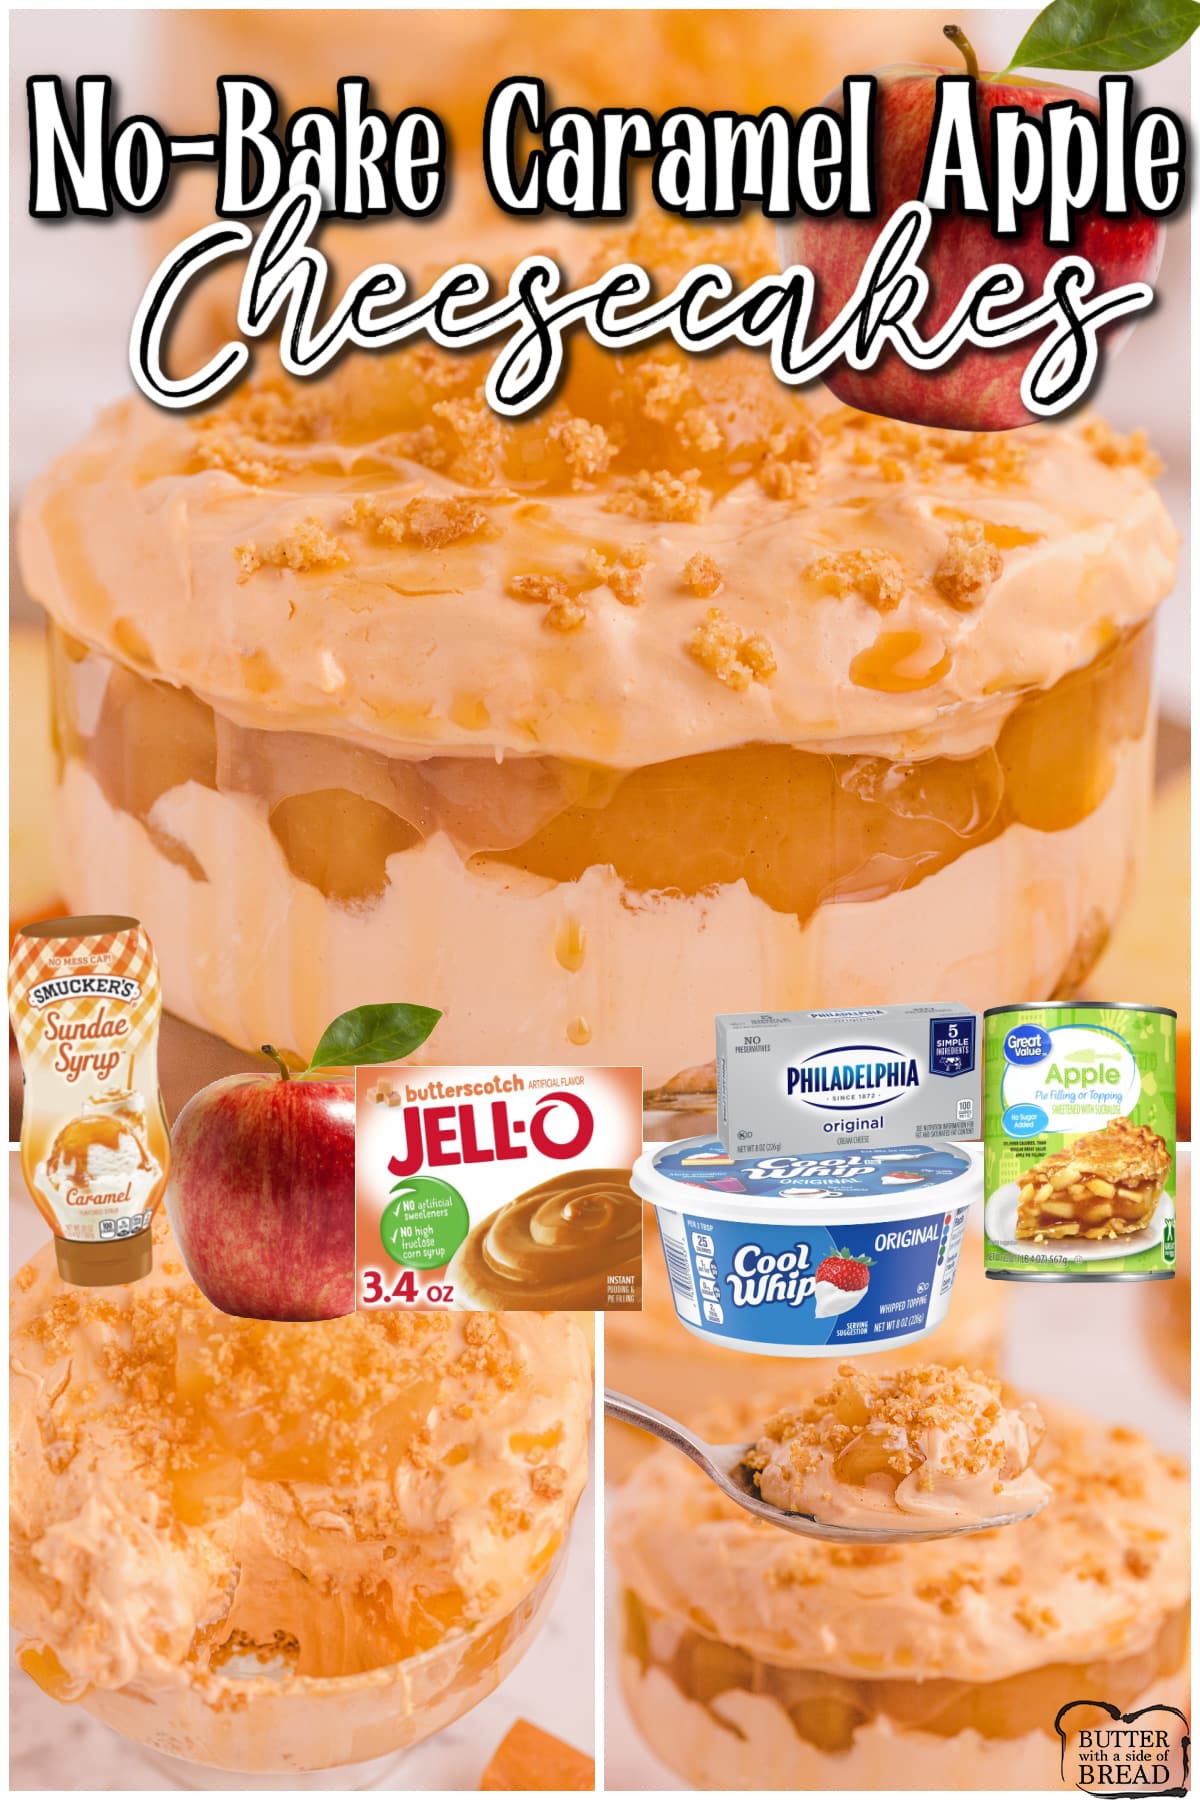 No-Bake Caramel Apple Cheesecakes taste like apple pie in cheesecake form! Simple recipe with a rich, creamy filling, spiced apples & caramel!